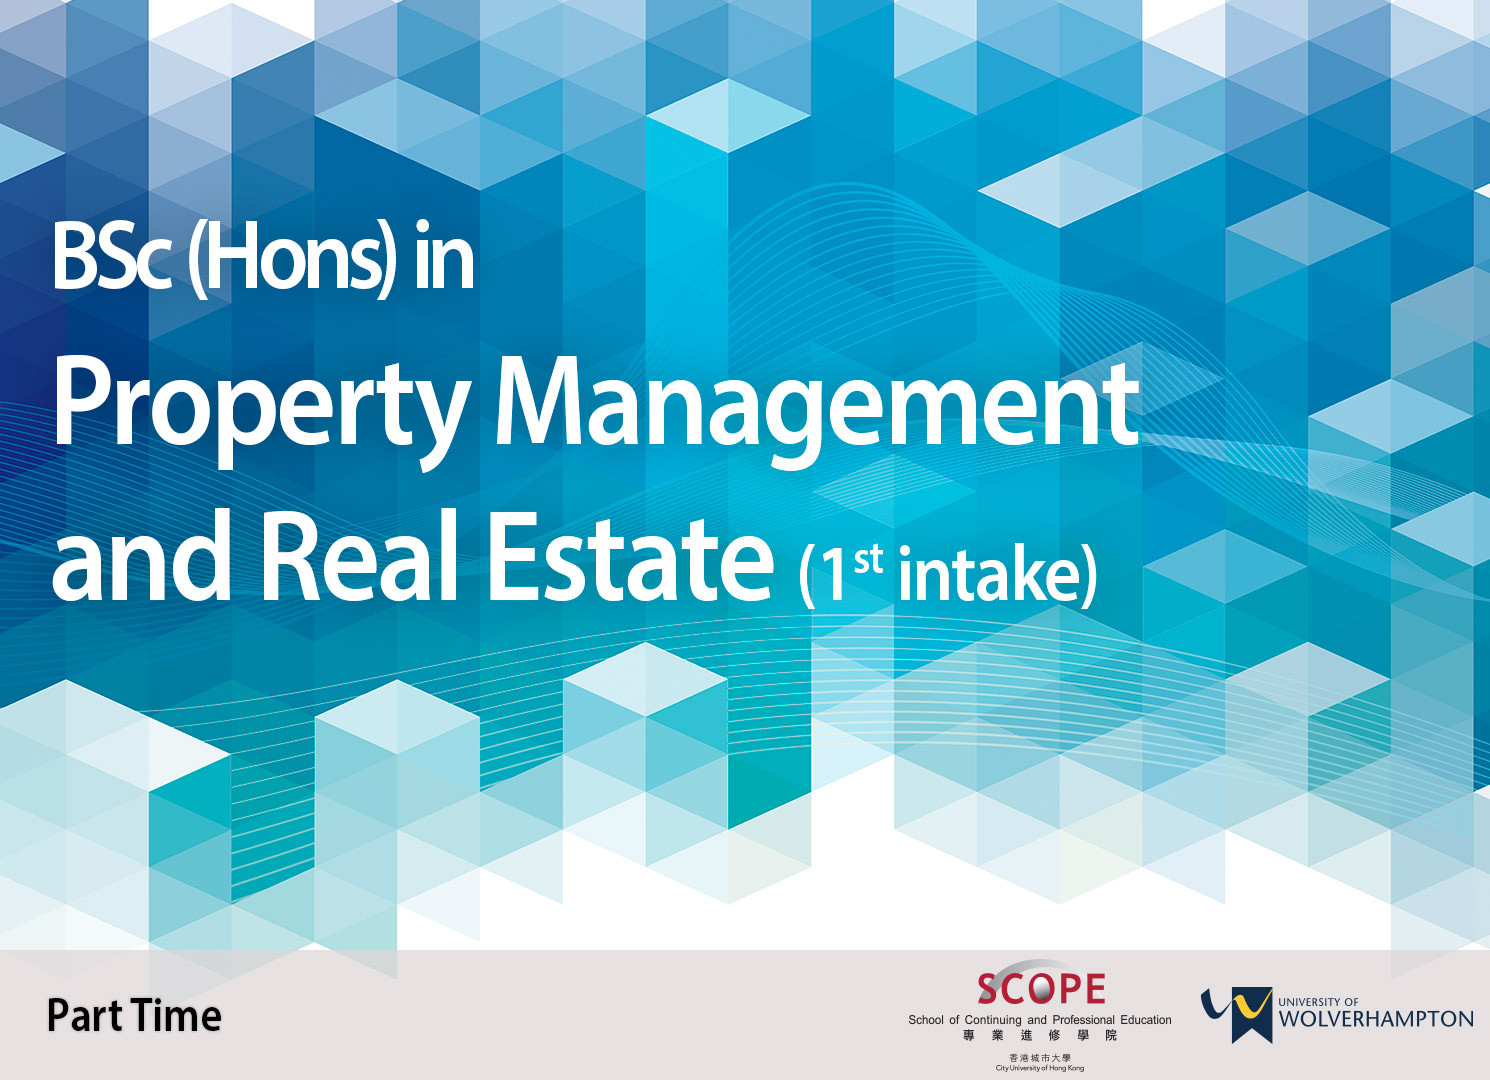 BSc (Hons) in Property Management and Real Estate